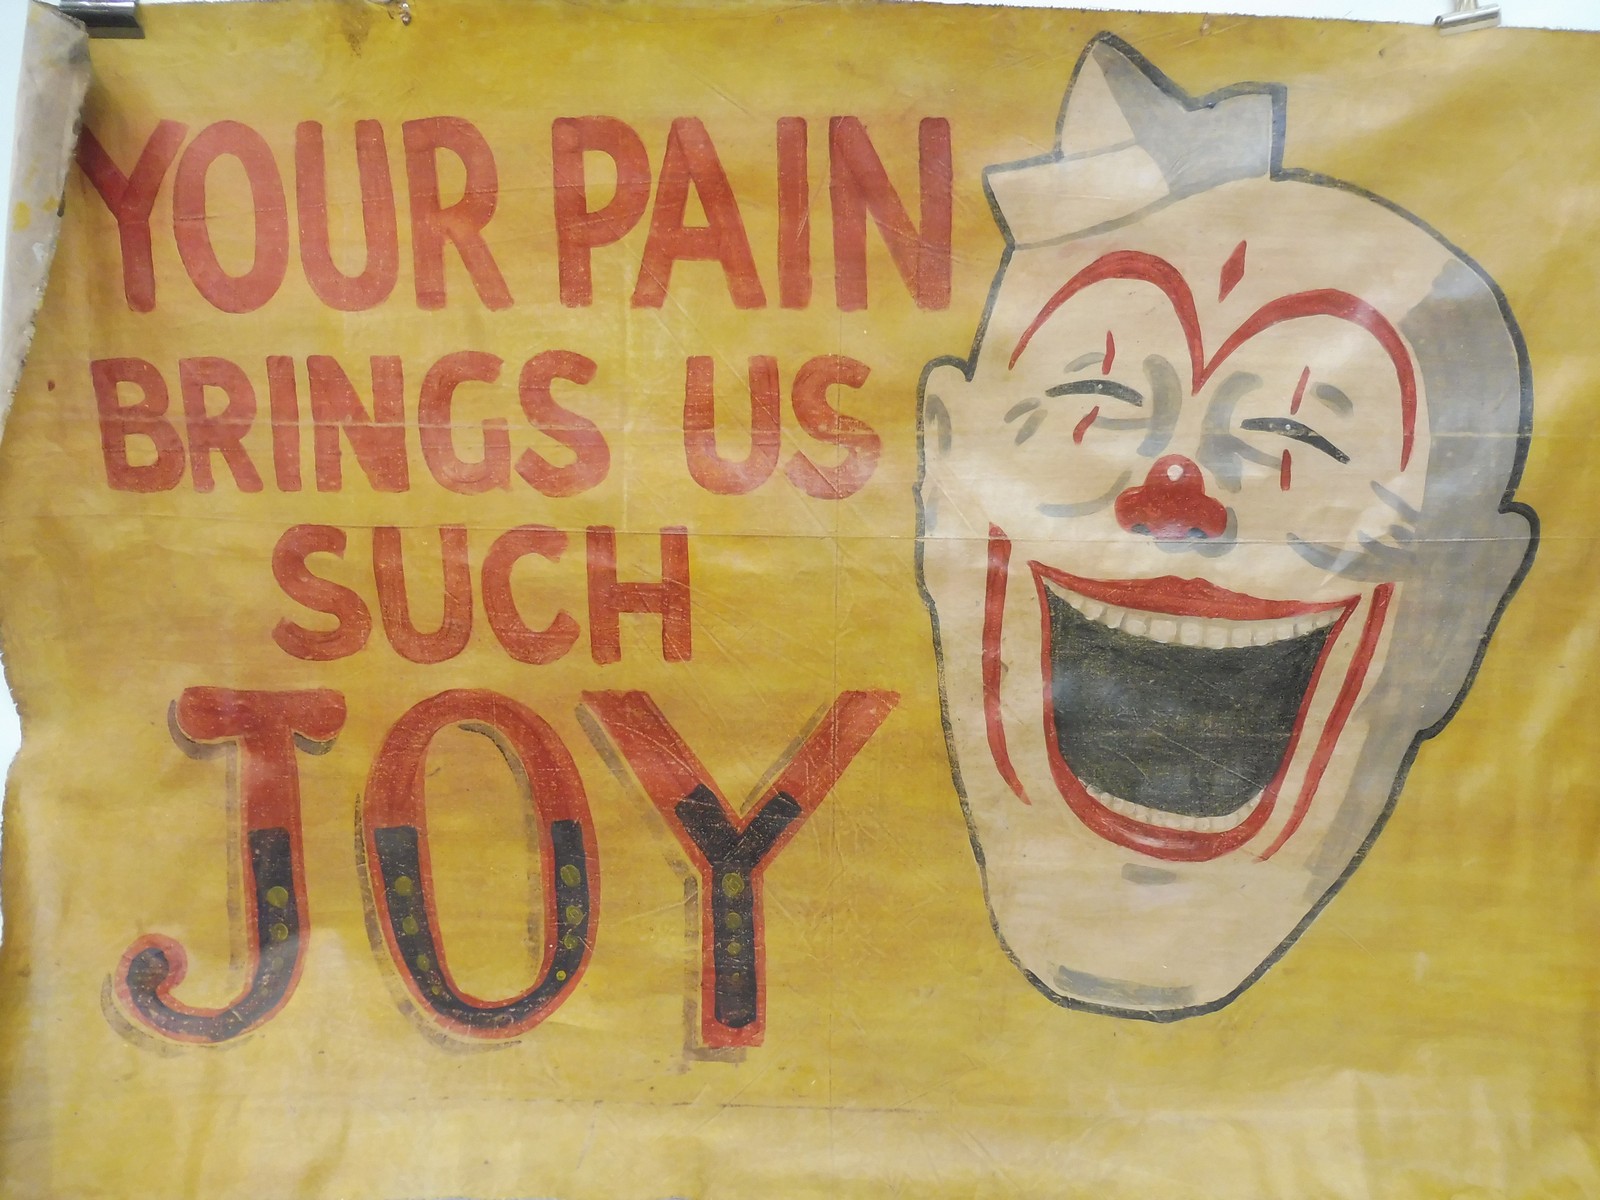 An original 'House of Horrors' artwork canvas banner, in the form of a clown, 61 x 42".